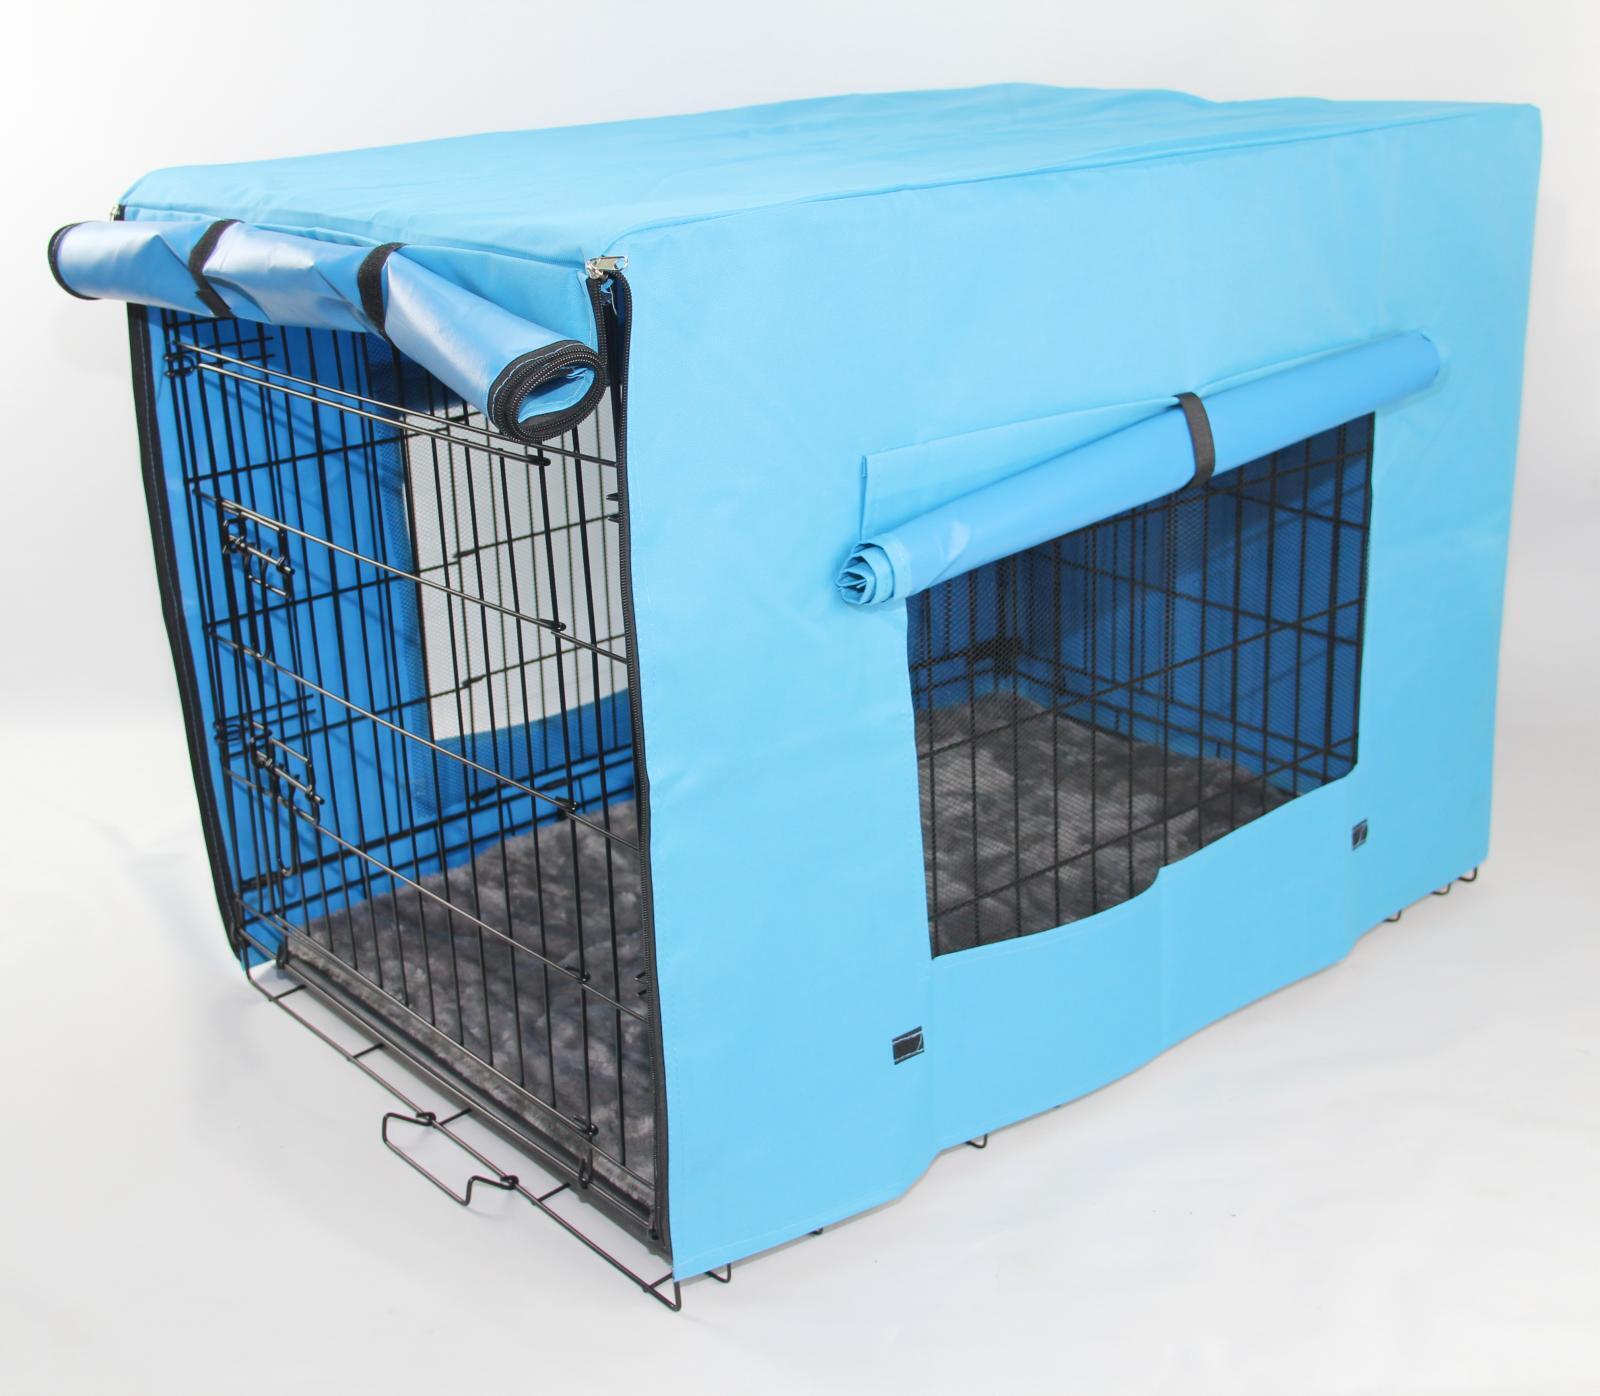 36' Portable Foldable Dog Cat Rabbit Collapsible Crate Pet Cage with Cover Mat Blue